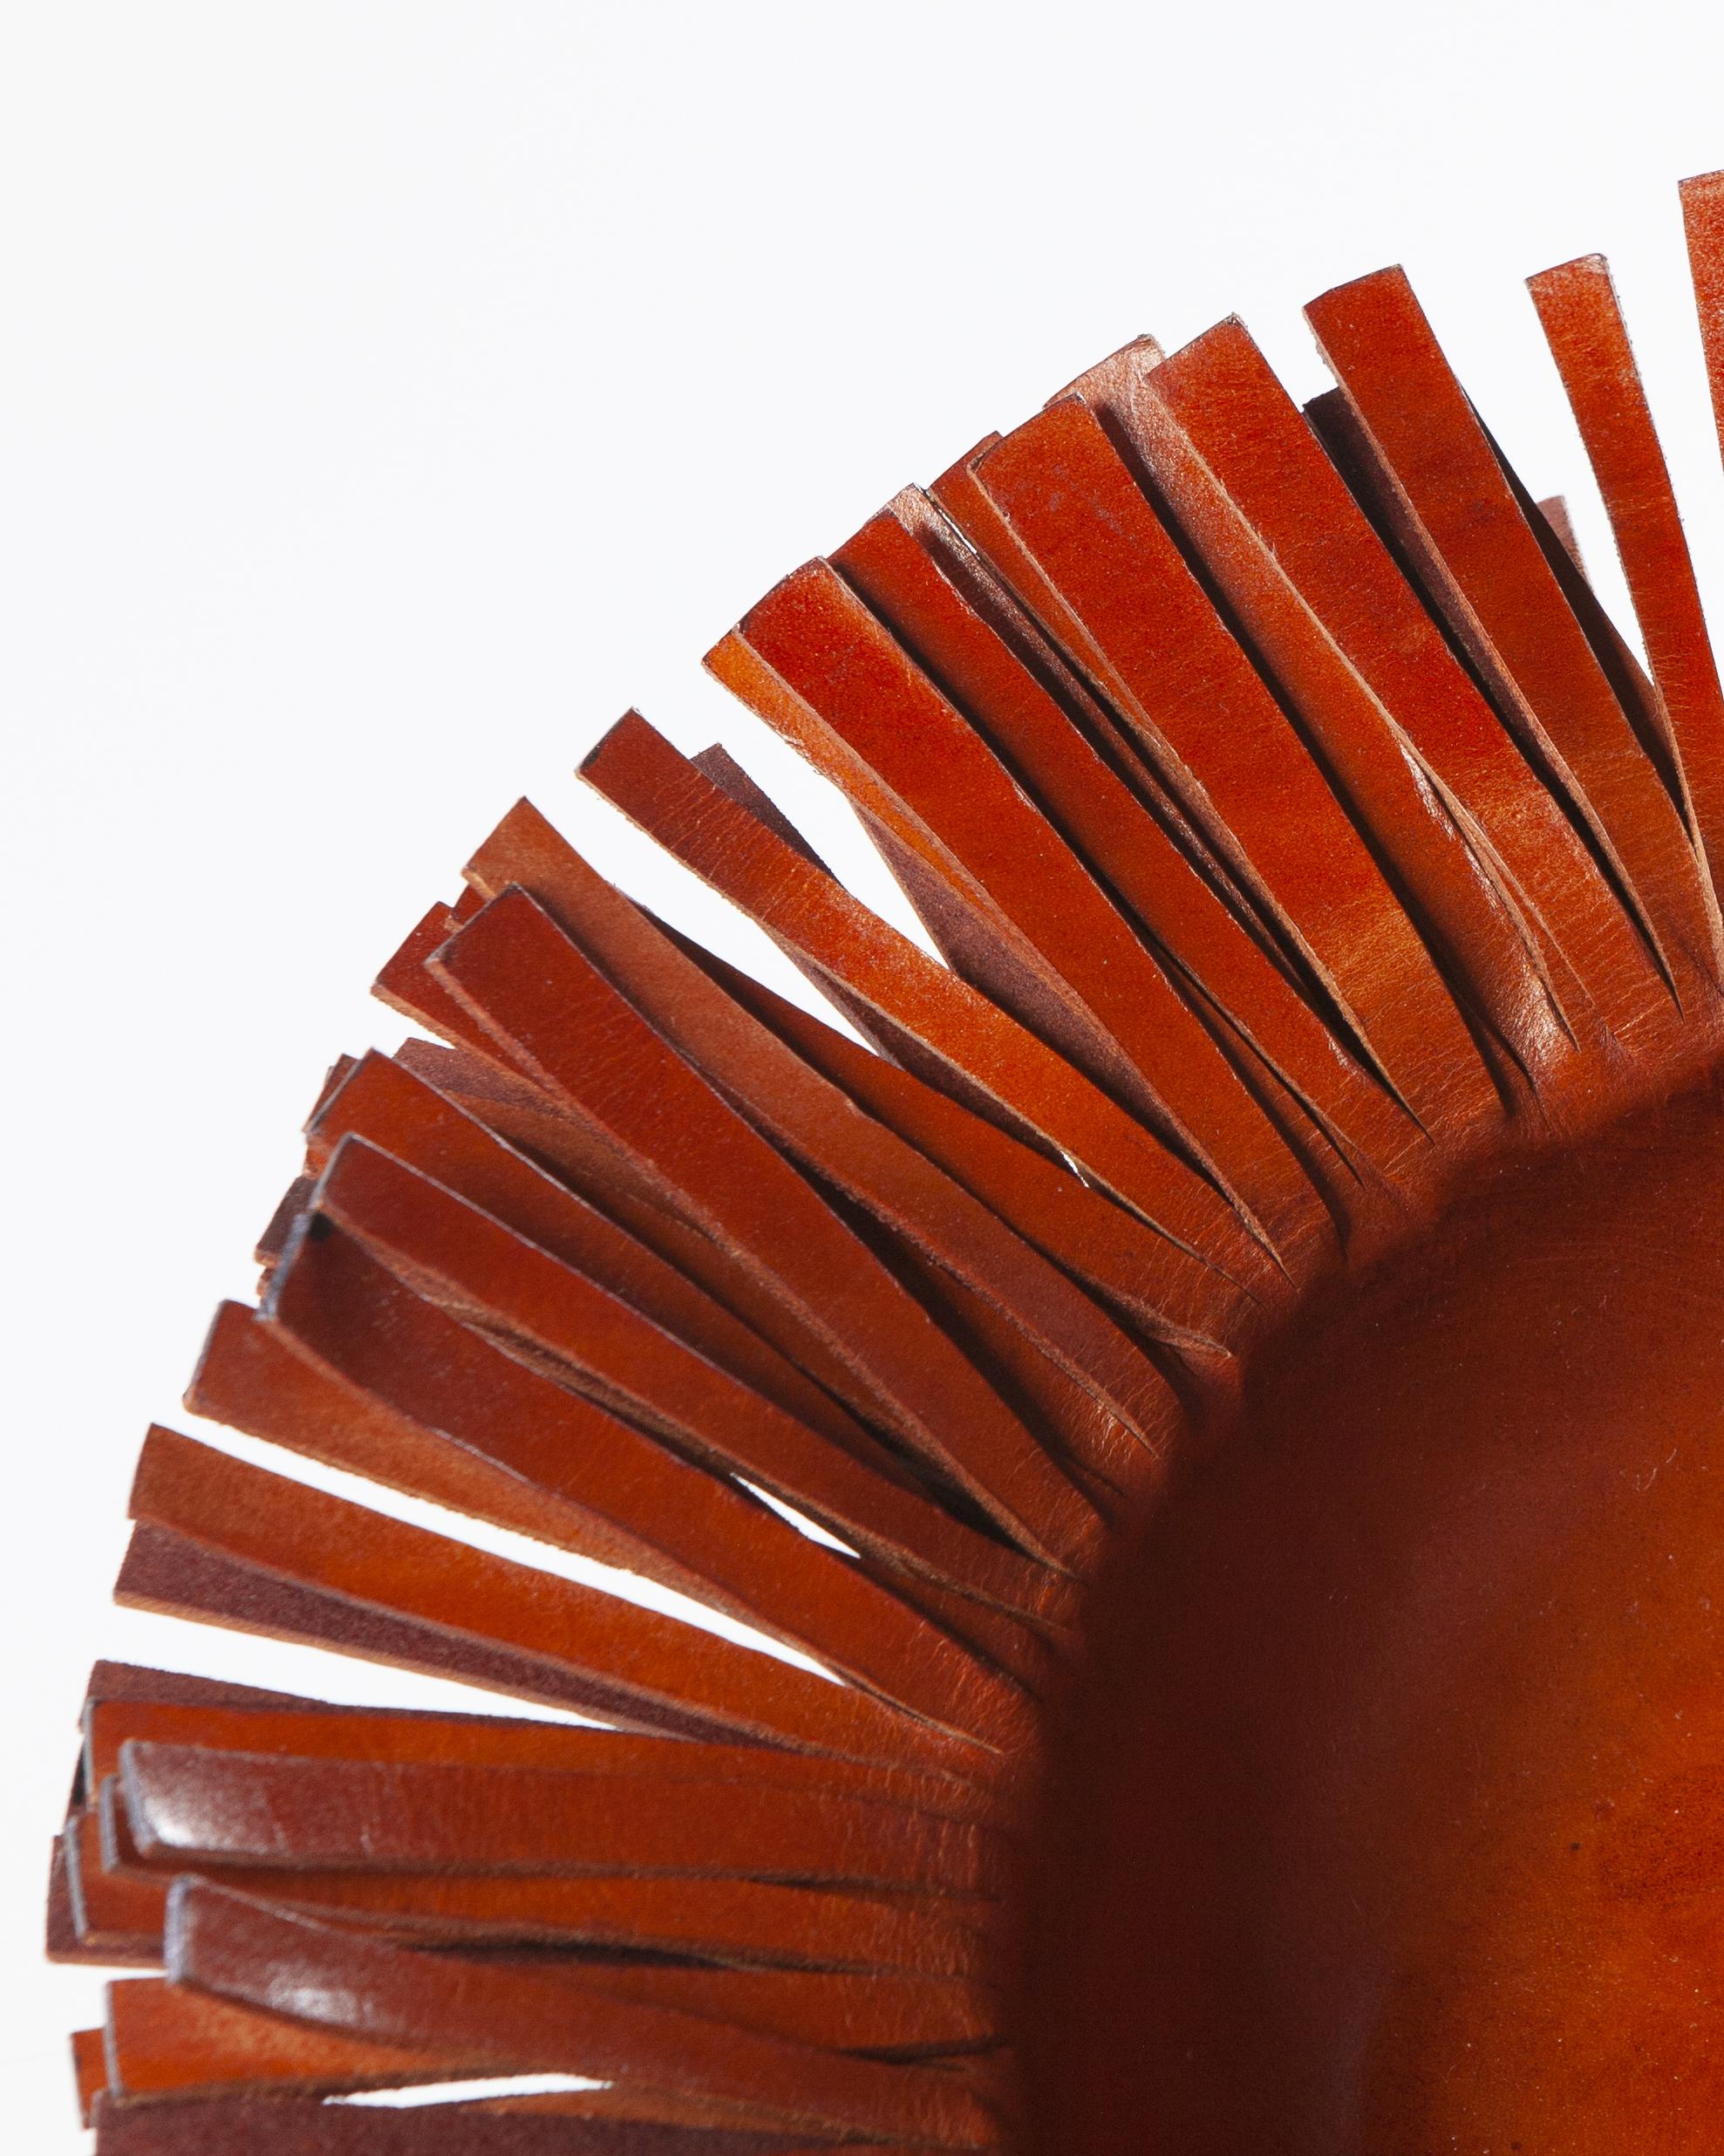 This handmade fringed leather bowl is the perfect centerpiece to complete your dining room table or any room in your home. Rustic charm meets contemporary handcrafted design sensibility in this exquisite bowl.

Size: 12